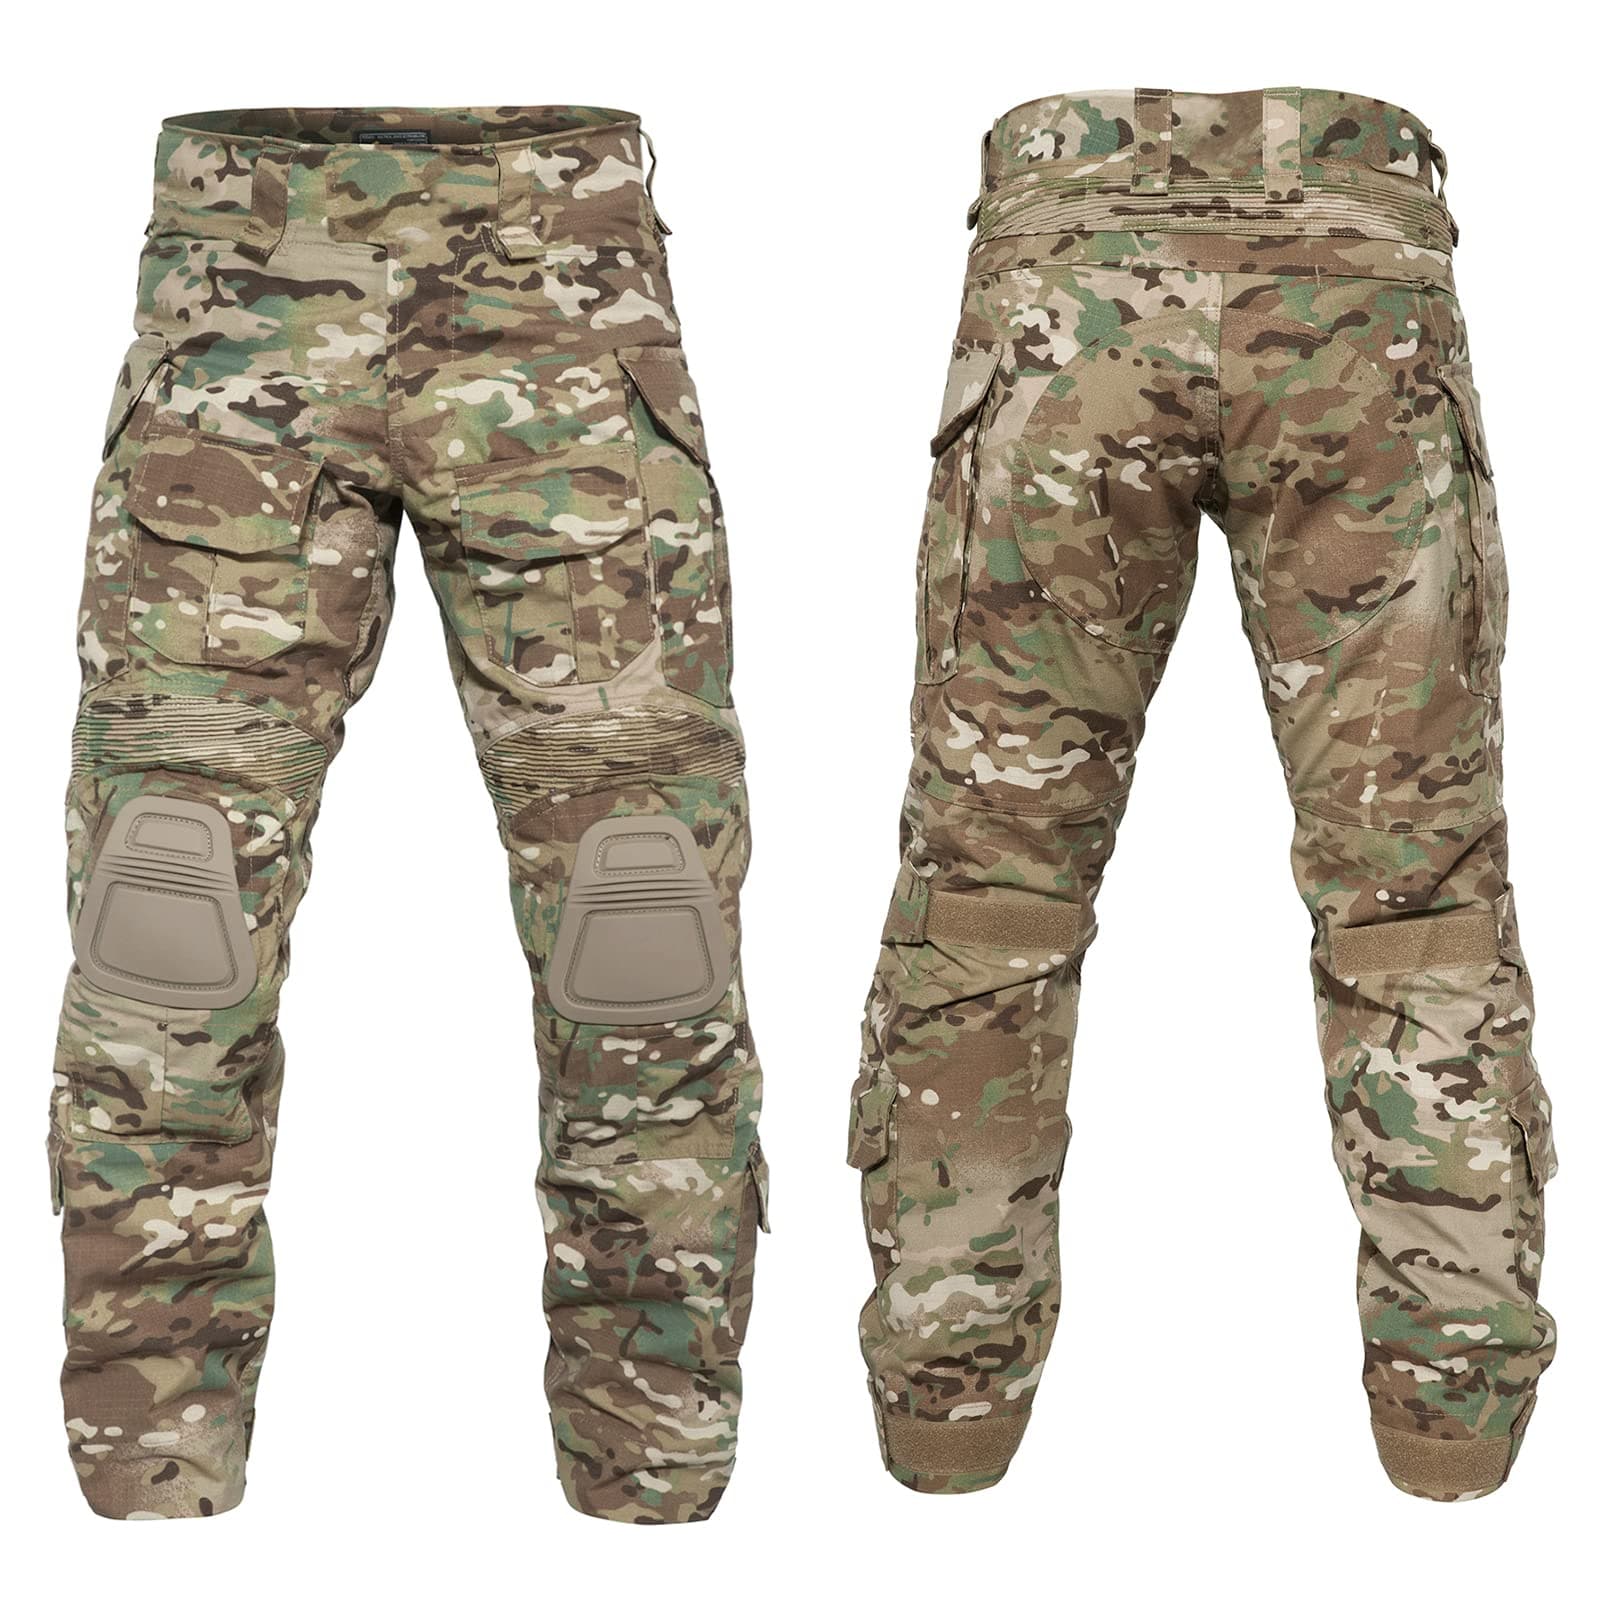 Army Tactical Desert Combat Pants with Knee Pads - G3